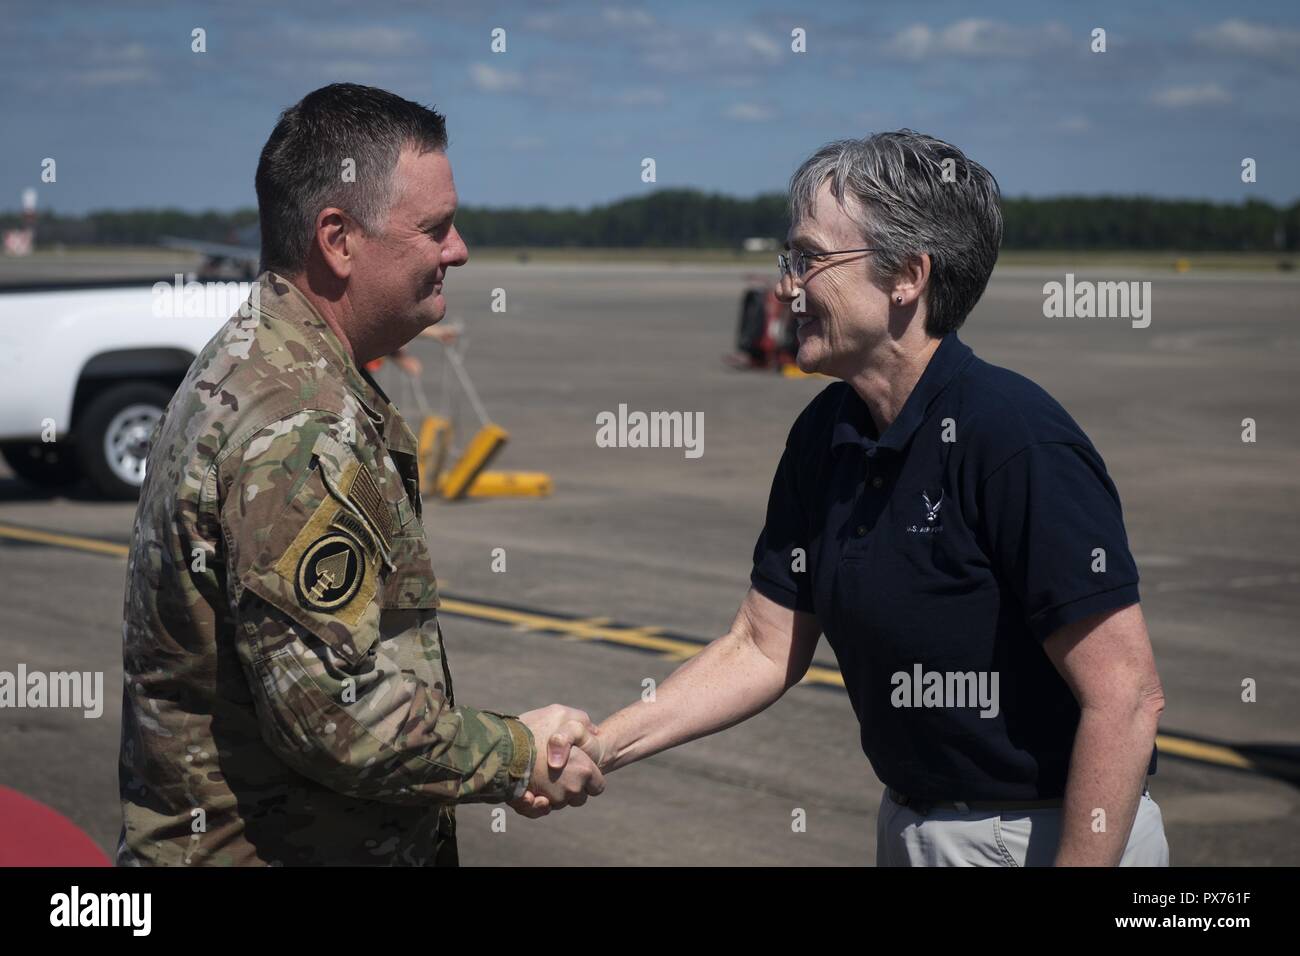 U.S. Air Force Lt. Gen. Brad Webb, left, commander of Air Force Special Operations Command, greets Secretary of the Air Force Heather Wilson at Hurlburt Field, Florida, Oct. 14, 2018, October 14, 2018. Aircrew members with the 8th Special Operations Squadron transported Air Force senior leaders from Hurlburt Field to Tyndall Air Force Base to assess the damage from Hurricane Michael, one of the most intense tropical cyclones to ever hit the U.S. (U.S. Air Force photo by Senior Airman Joseph Pick). () Stock Photo